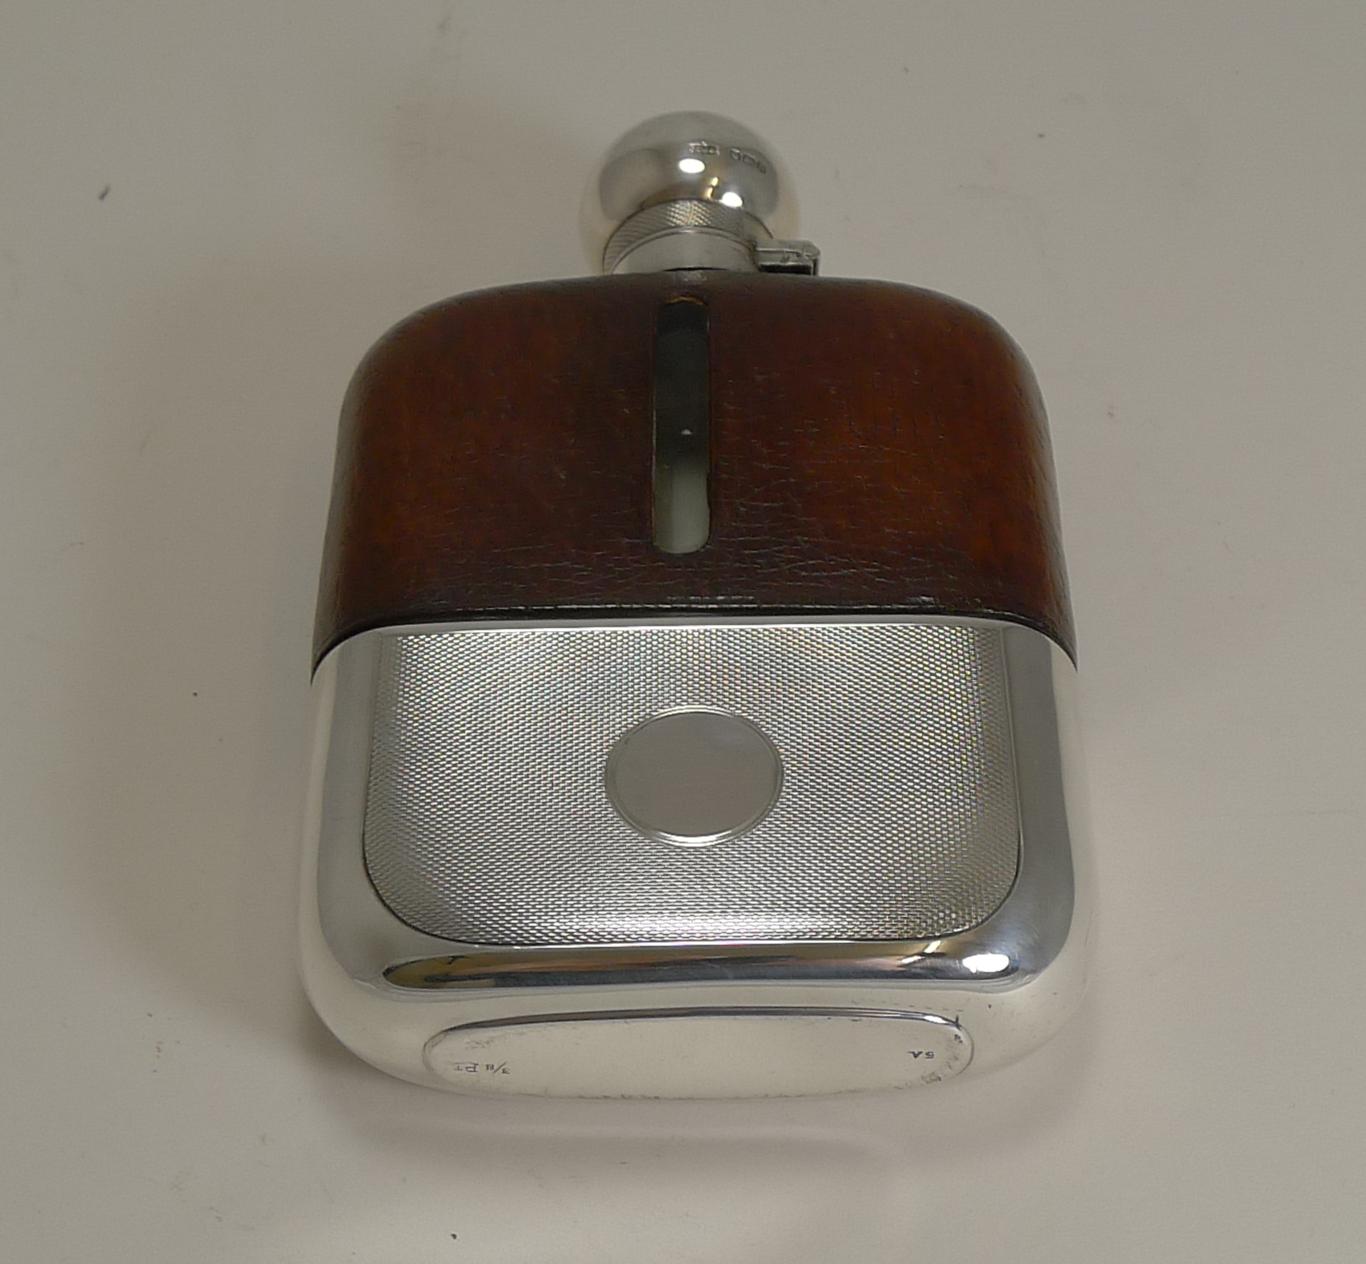 A very handsome large liquor or whisky flask by the top-notch silversmith, James Dixon and Sons of Sheffield.

I love the engine turned work, it was used extensively during the Art Deco era, and this silver is hallmarked for Sheffield 1930, 88